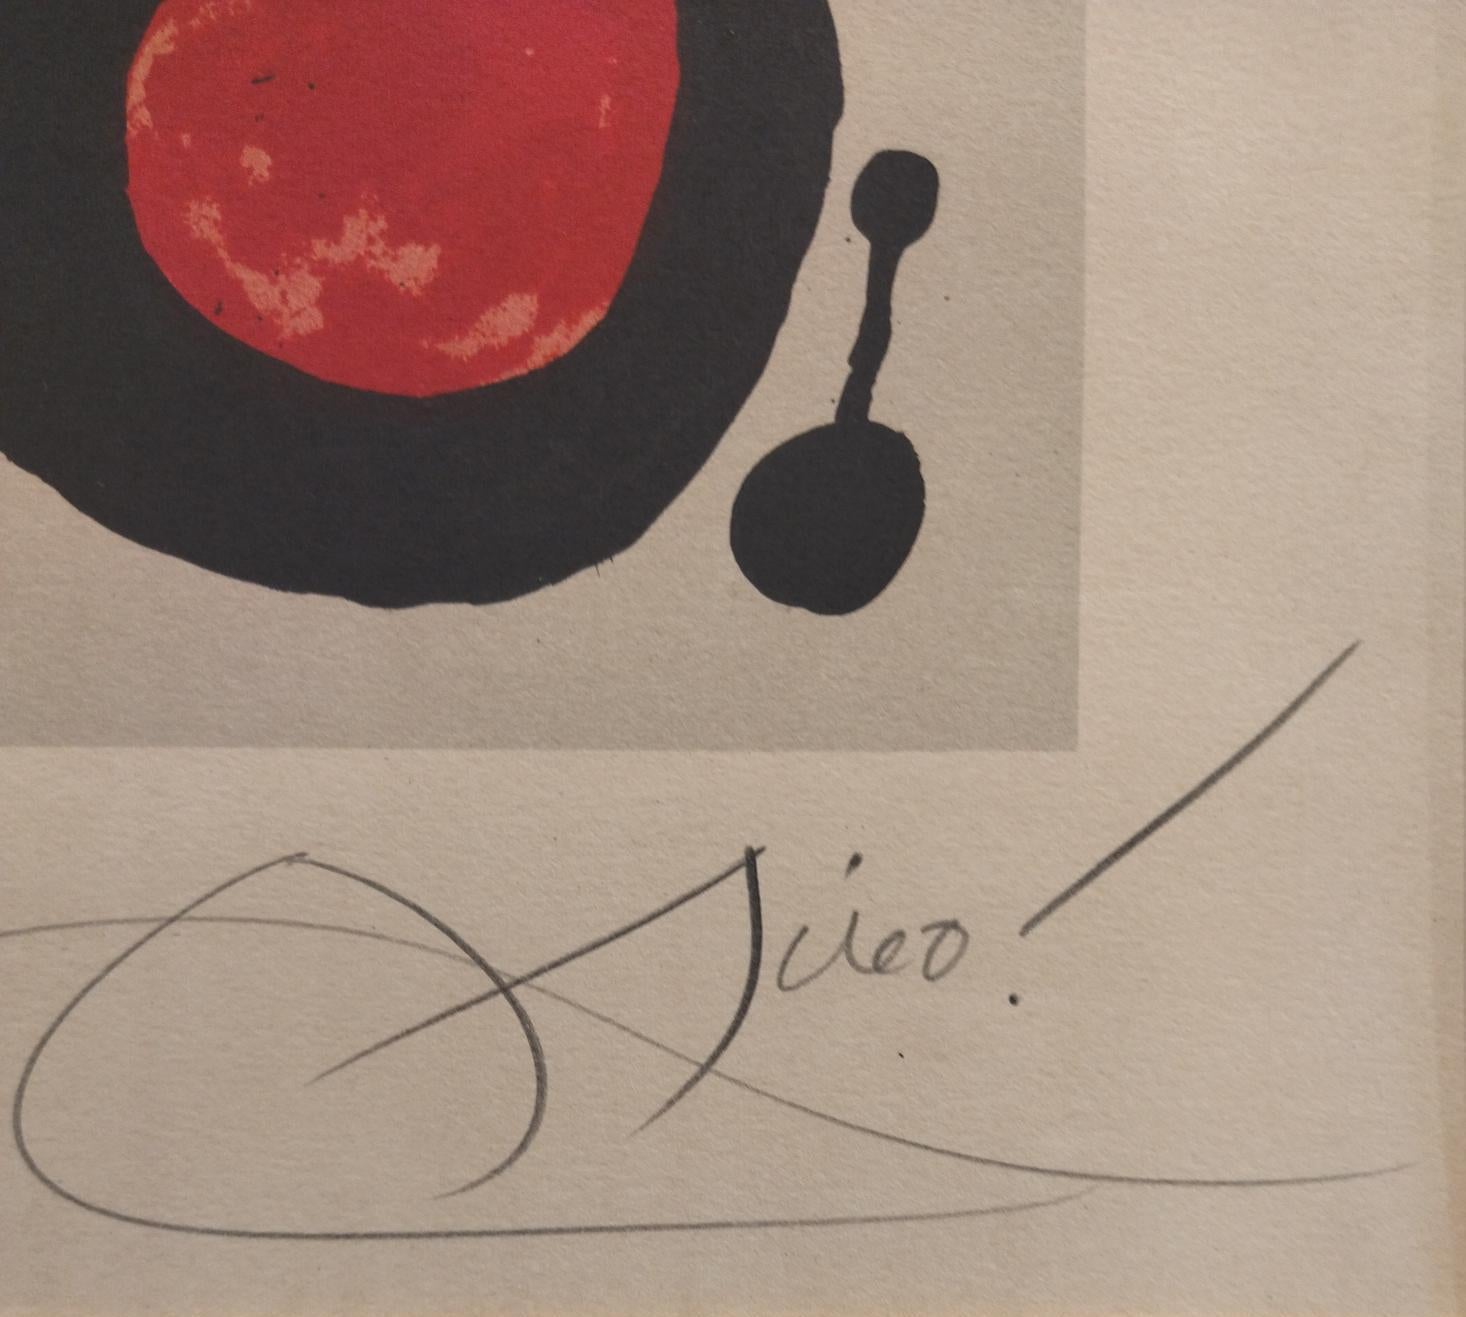 Miro   Numbers  Letters  Red  Black  Vertical CENTRE EXCURSIONISTA. LITOGRAFIA - Abstract Print by Joan Miró